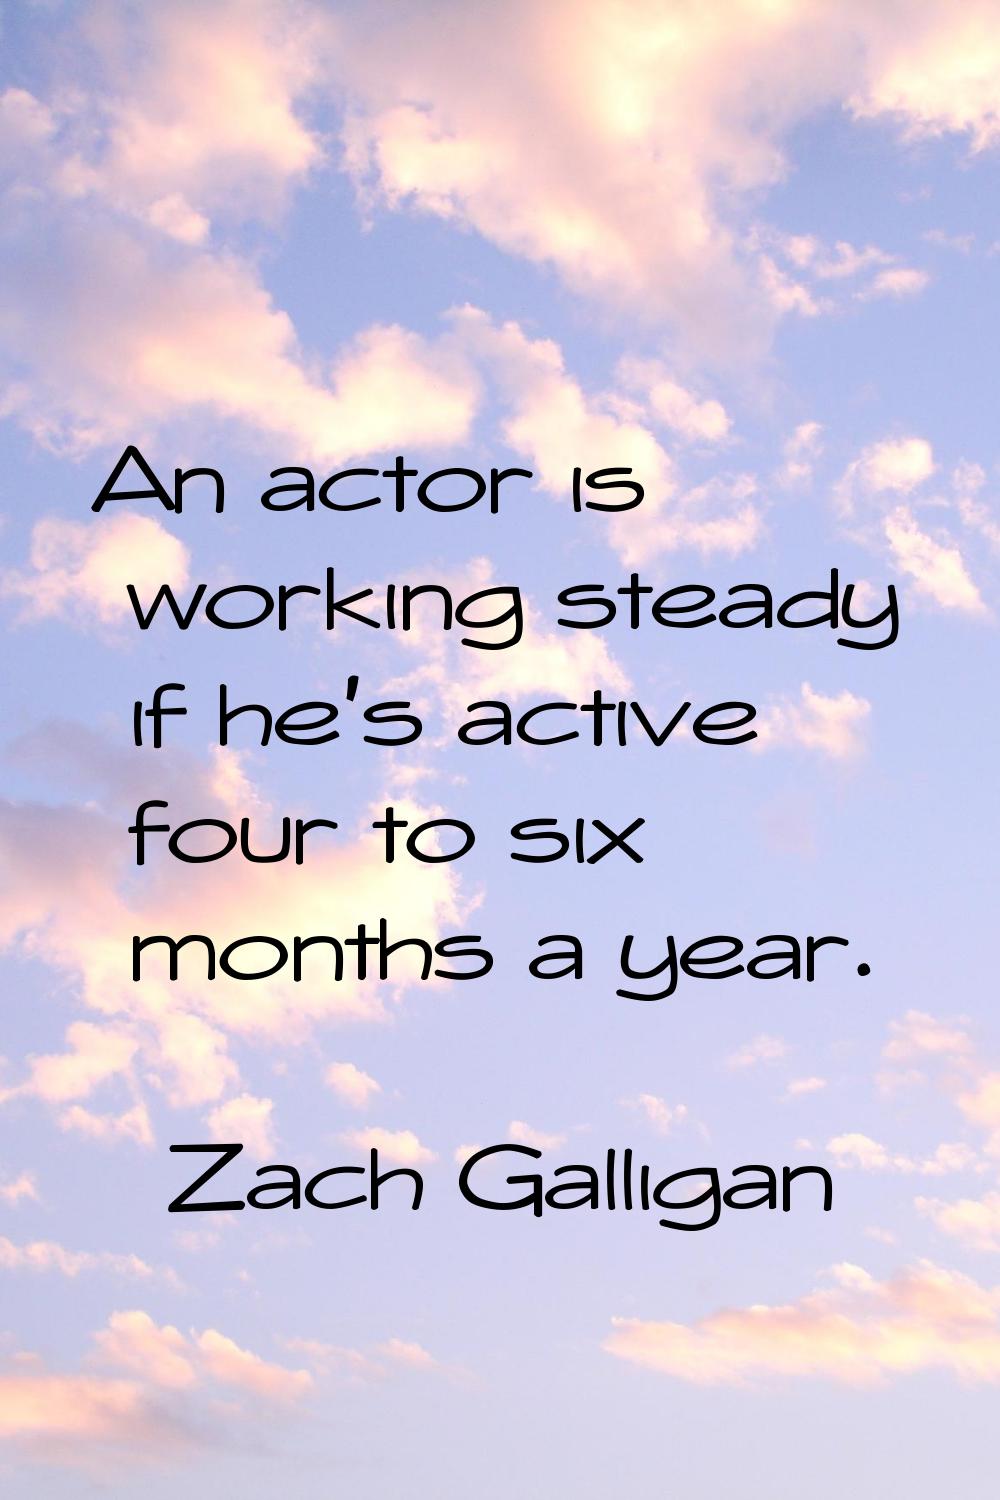 An actor is working steady if he's active four to six months a year.